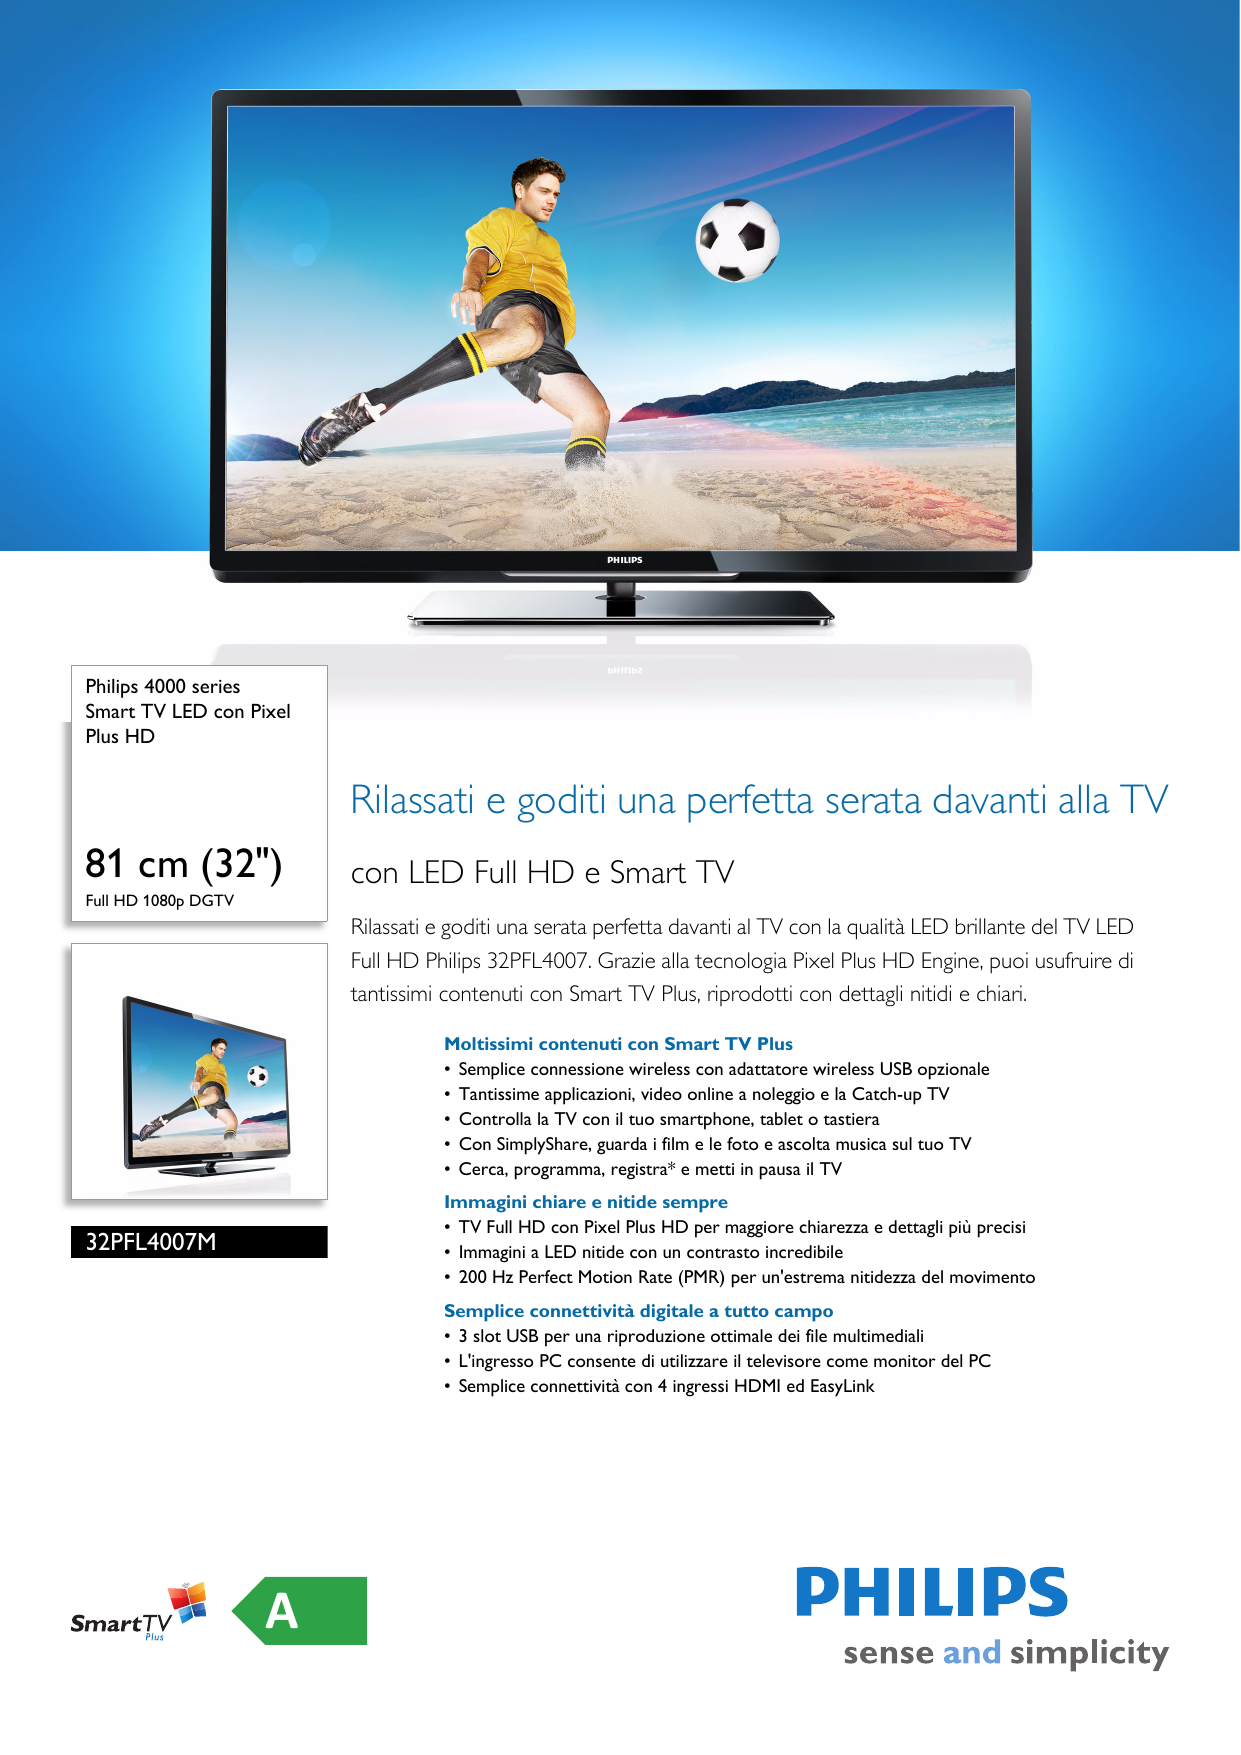 Page 1 of 3 - Philips 32PFL4007M/08 Smart TV LED Con Pixel Plus HD User Manual Scheda Tecnica 32pfl4007m 08 Pss Itait